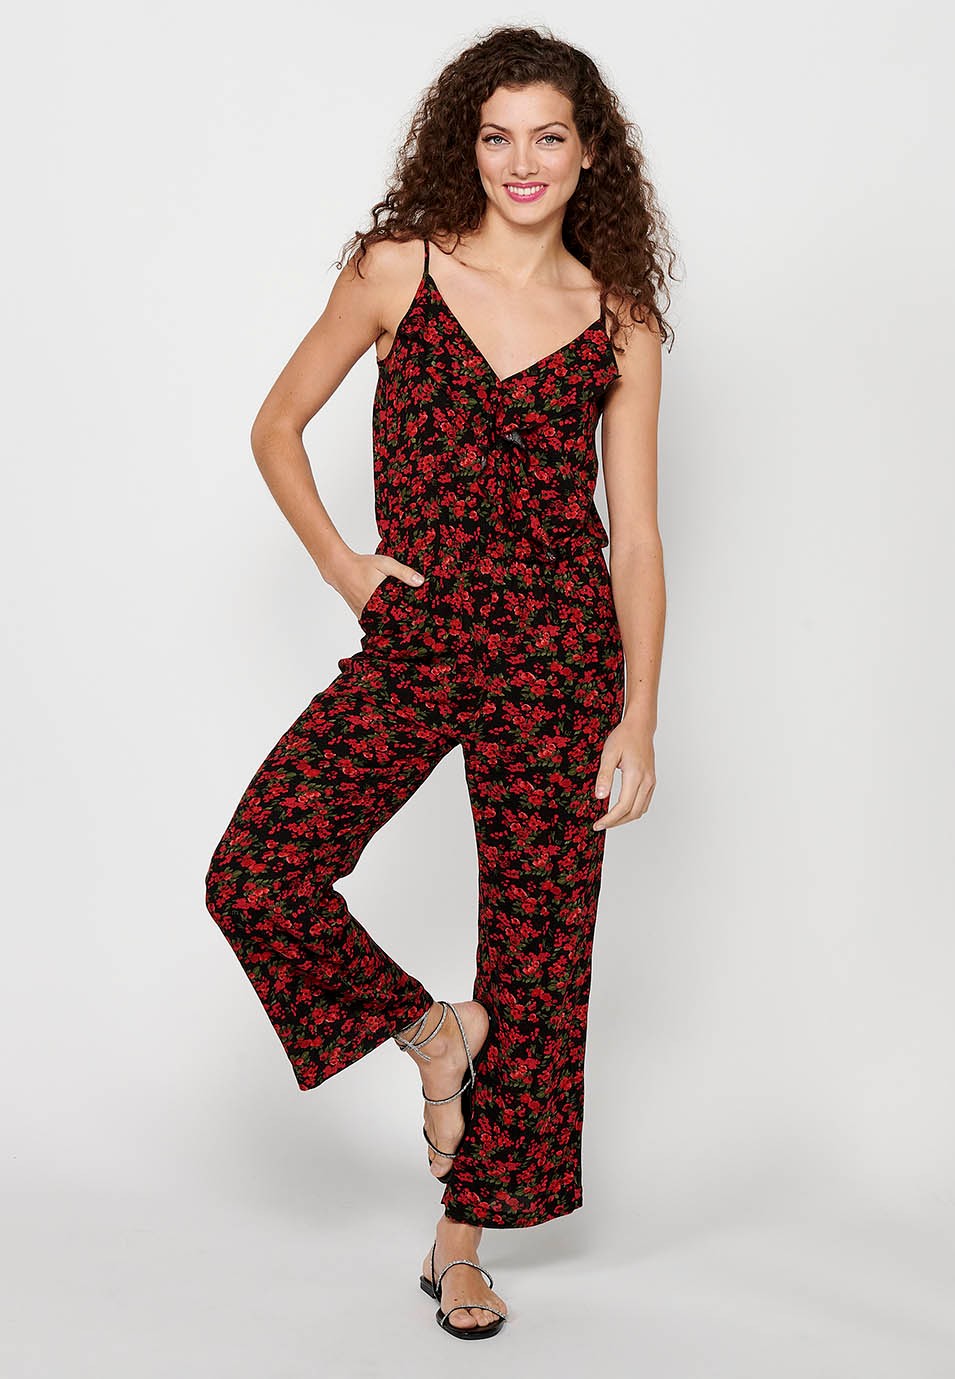 Long dress-trousers with adjustable straps with rubberized waist and red floral print for Women